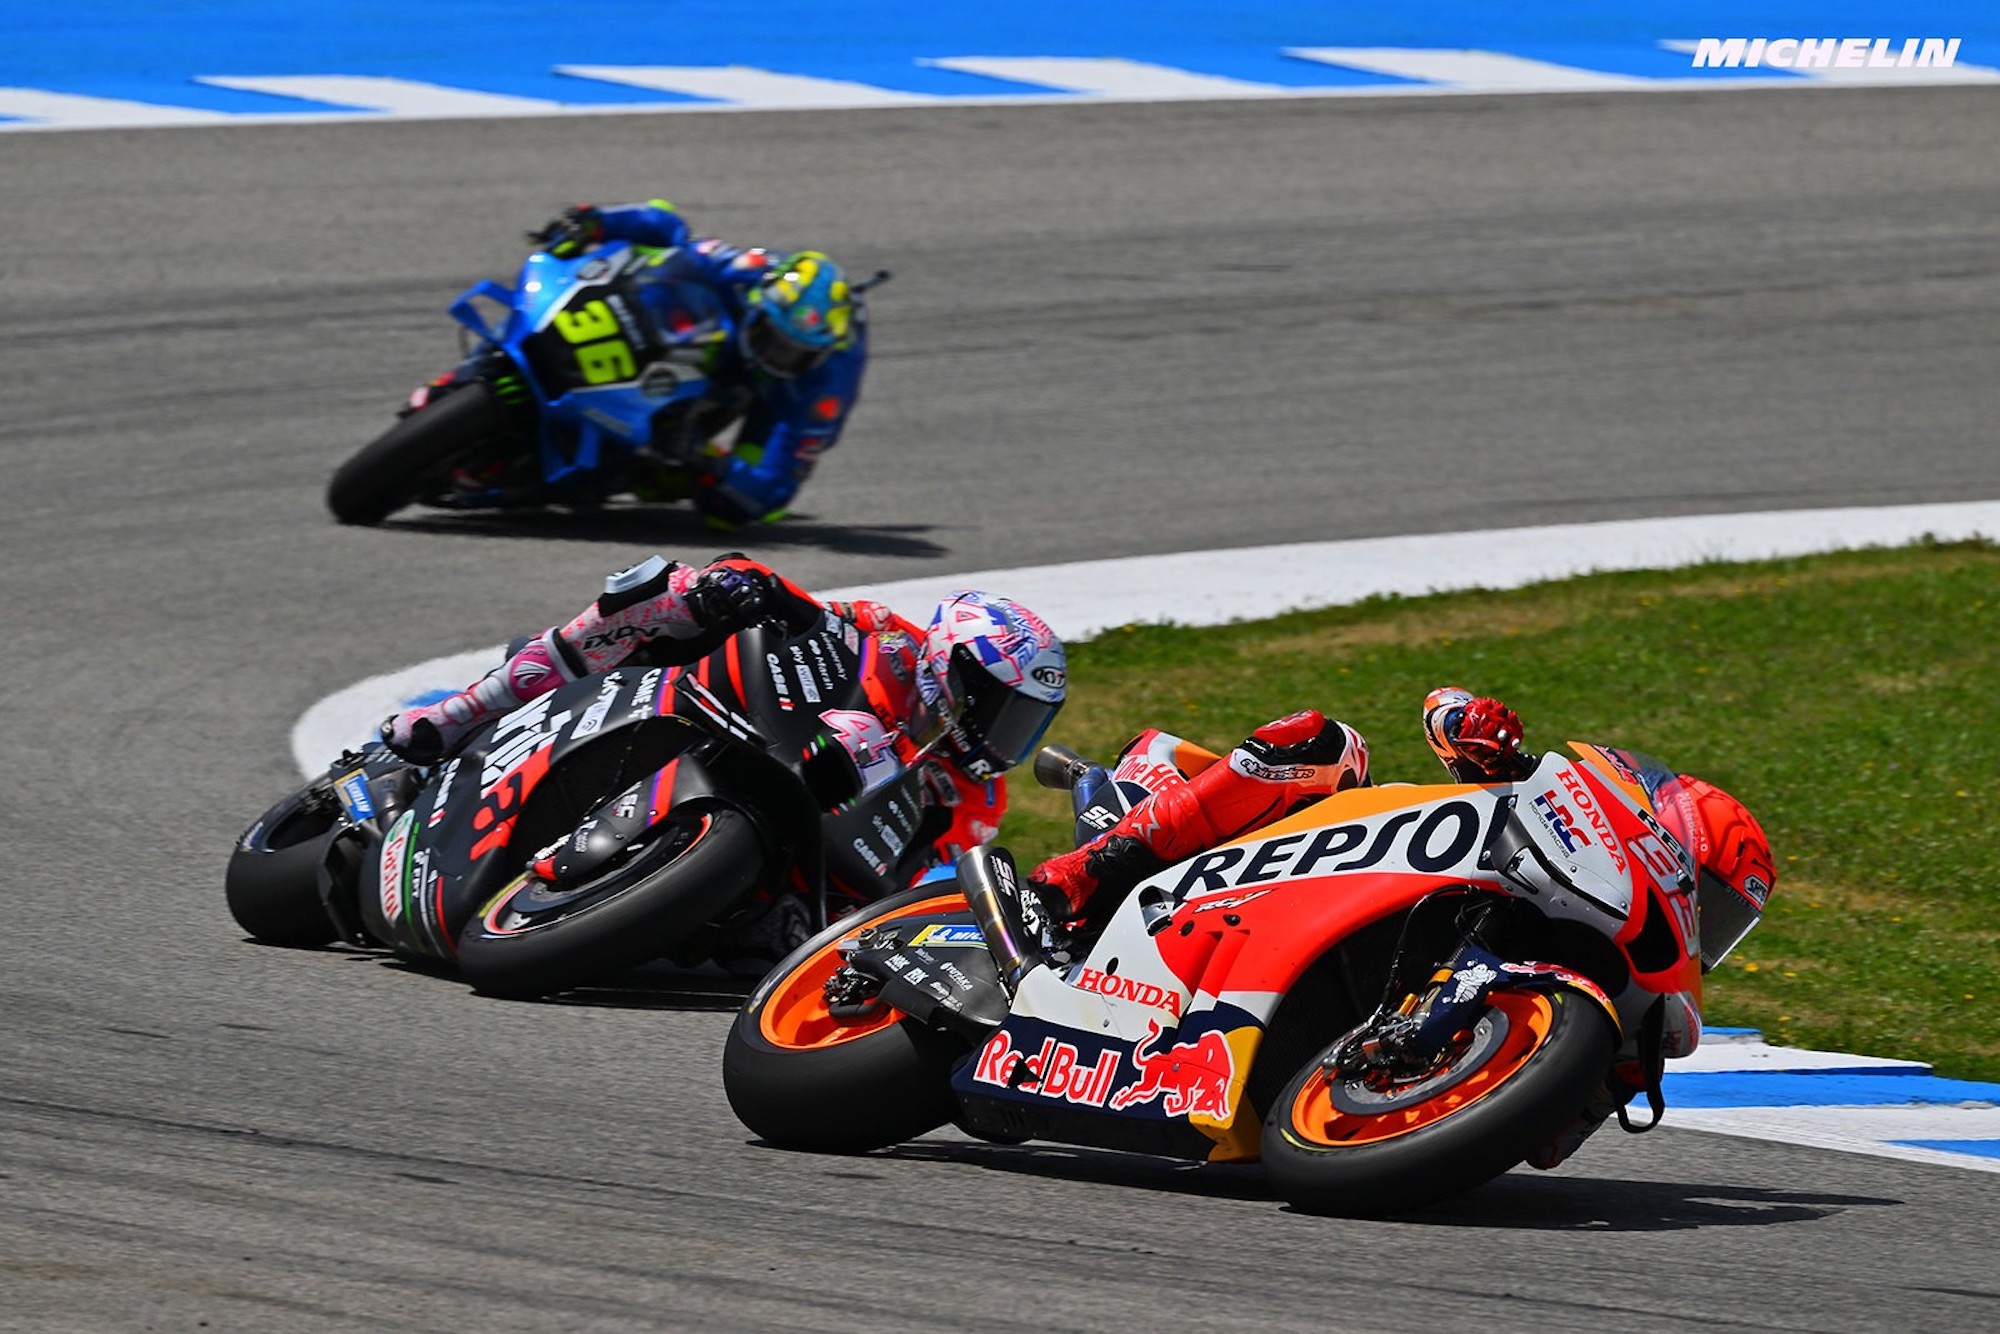 Joan Mir and Marc Marquez on the MotoGP circuit. Media sourced from Motorsport.